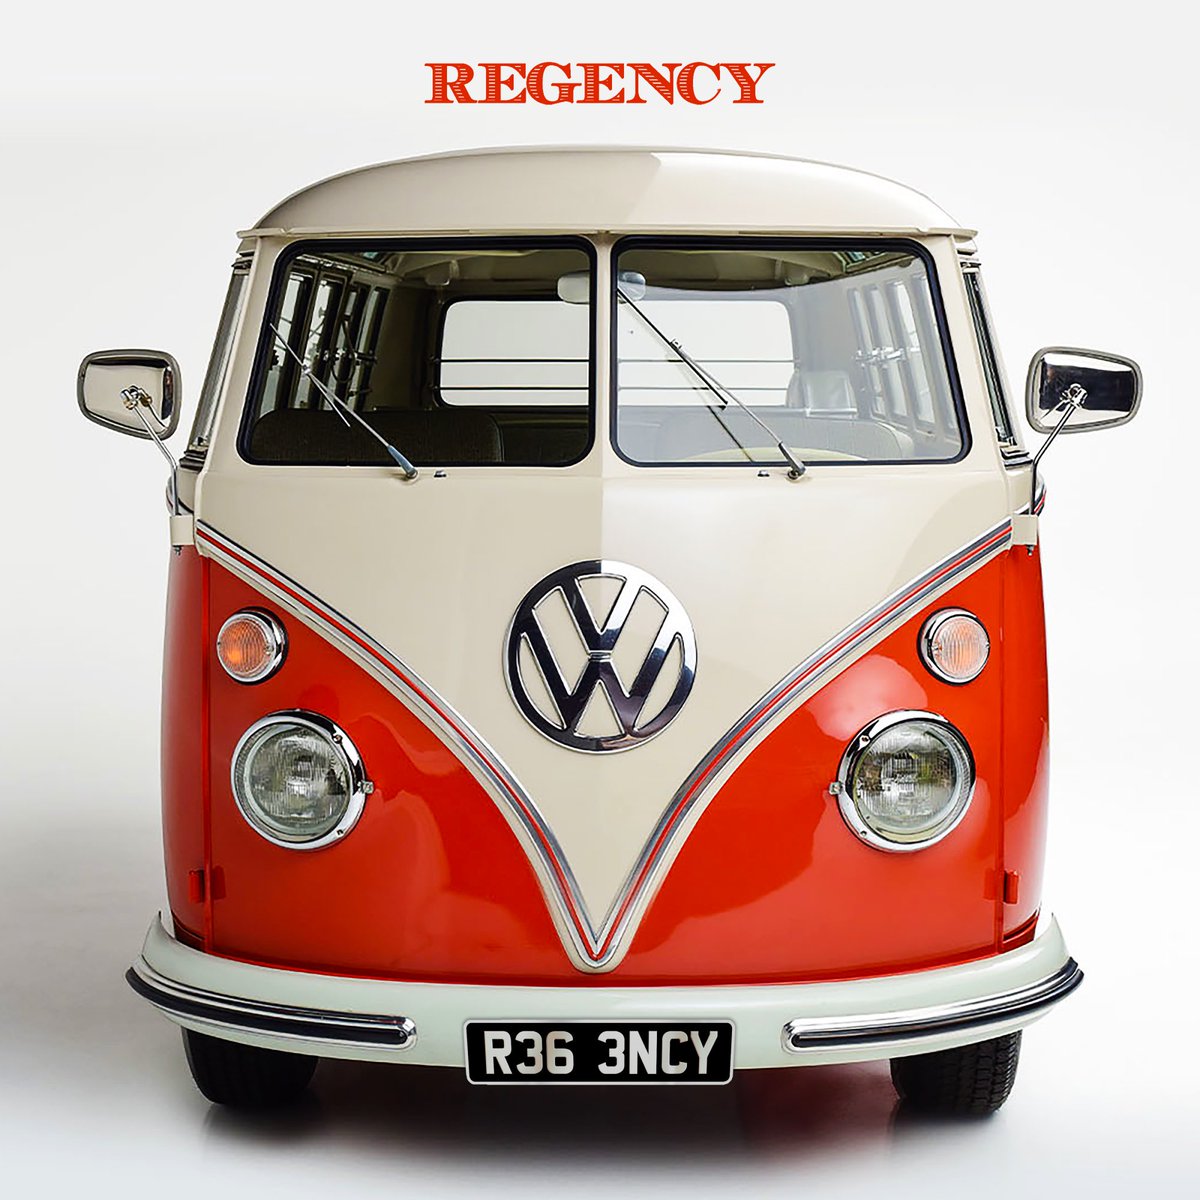 🚨!NEW SINGLE ALERT!🚨 My band REGENCY release a new song today!! 💥💿💥 Our 42nd single in 42 consecutive months!! 😎💥🎸💥🎸💥🎸💥 This track is called ‘VW’ 🚐🎶🚐🎶🚐🎶 Please have a spin here! 😃👉 linktr.ee/regency.music @shiner_sam